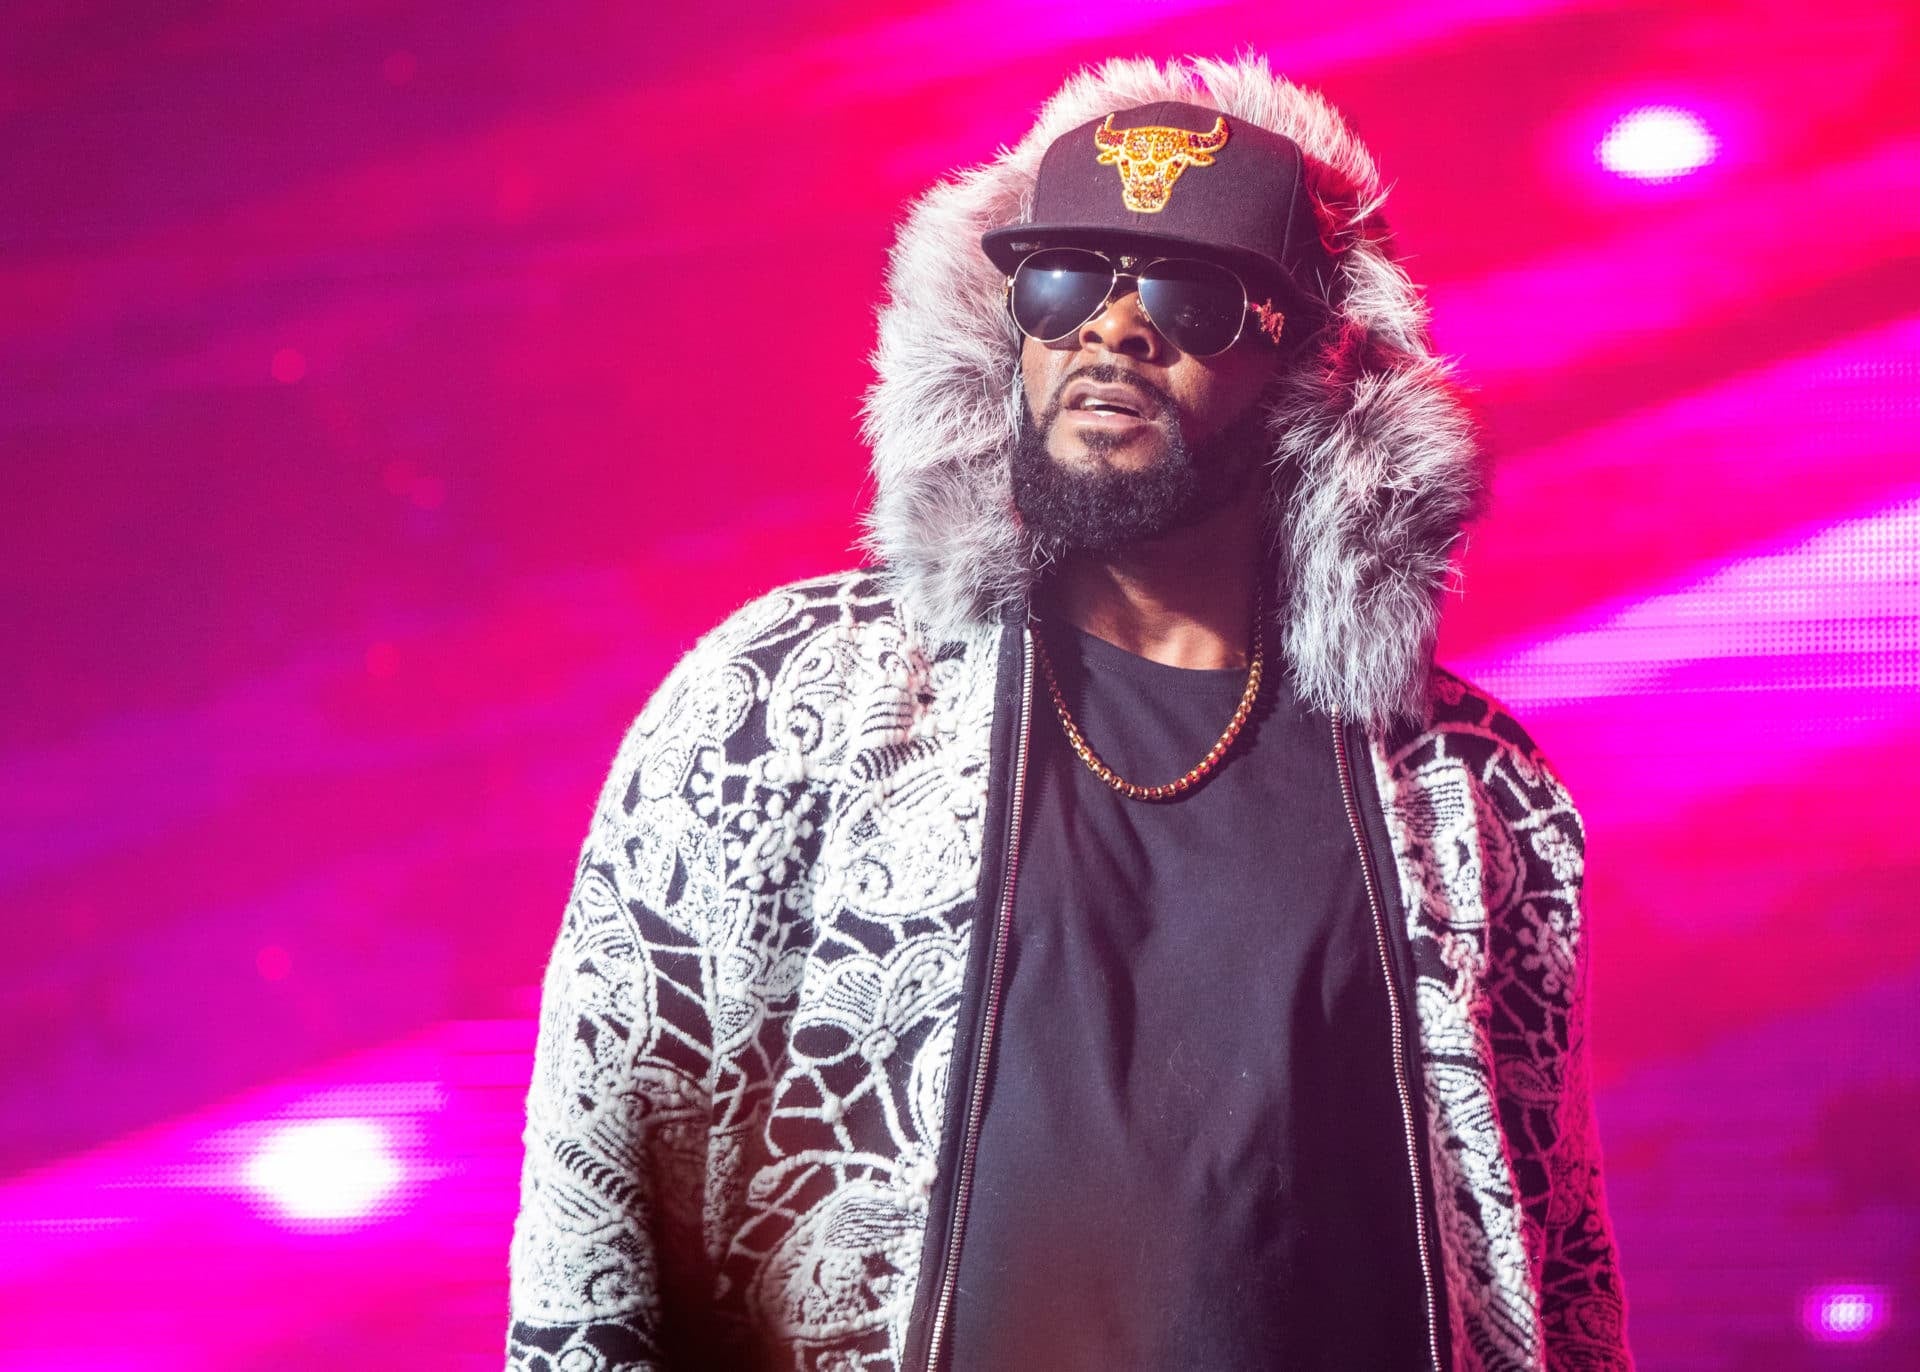 Report: R. Kelly Under Investigation In Georgia After ‘Surviving R. Kelly’ Series